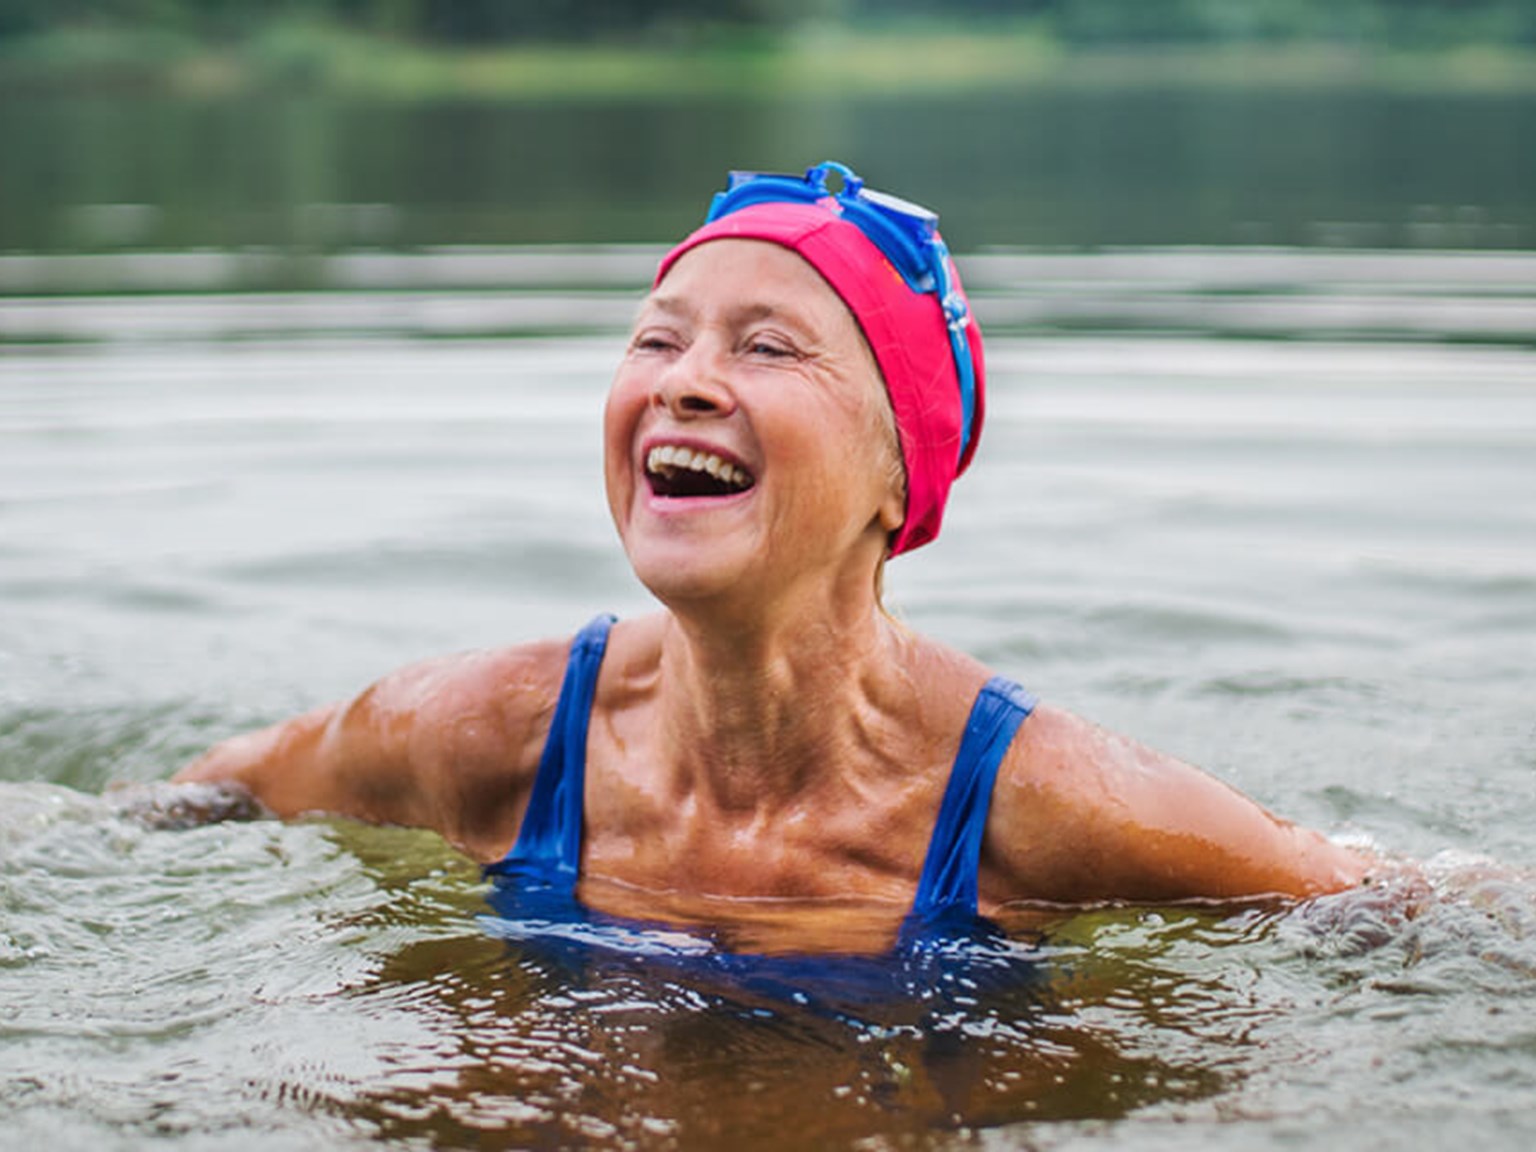 Happy older woman, wild swimming in a lake, wearing a pink swimming cap and blue goggles